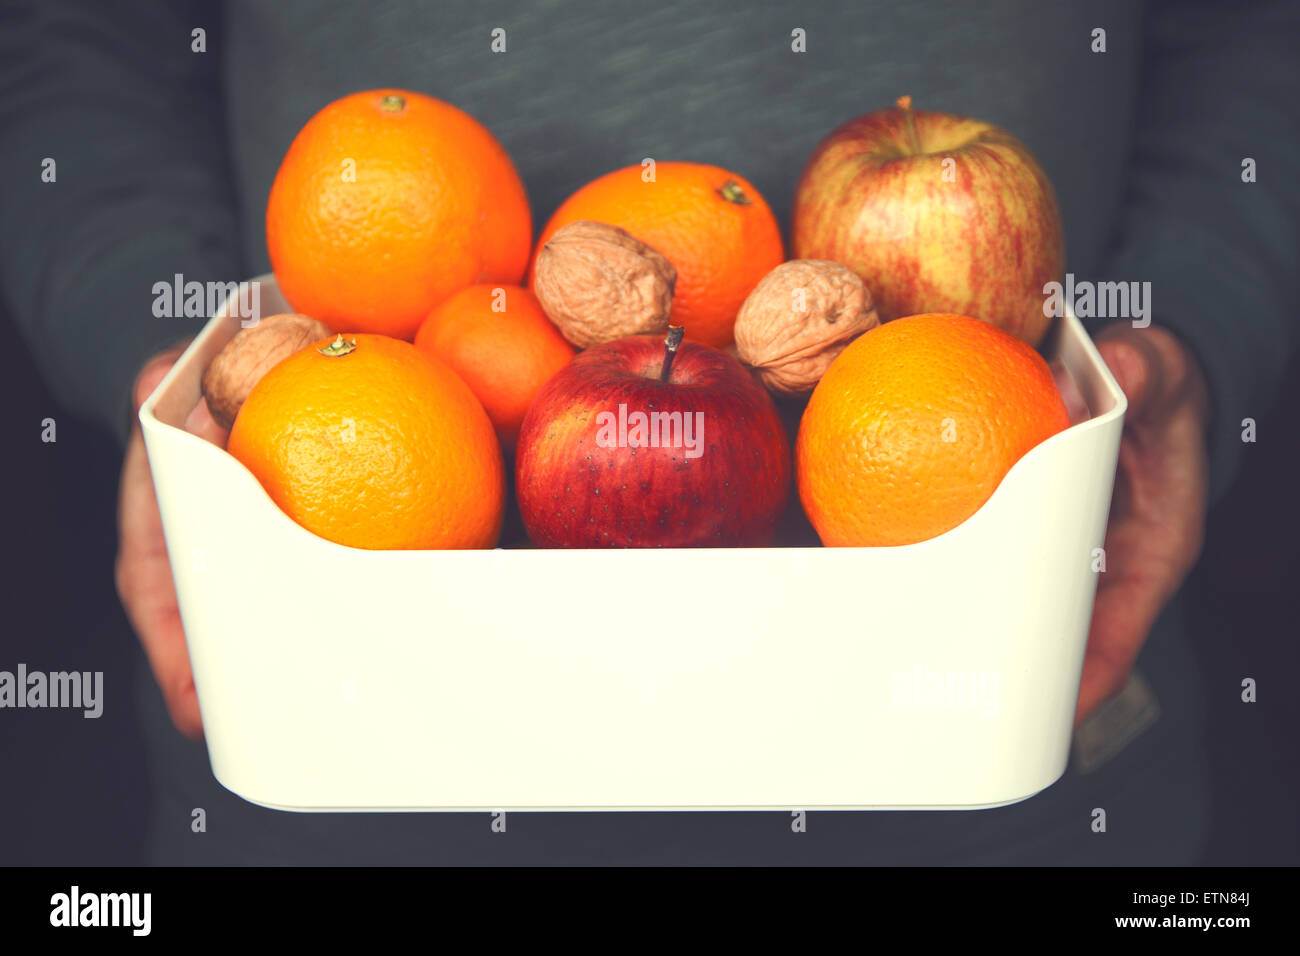 Close-up of a man holding a bowl of apples, oranges and  walnuts Stock Photo